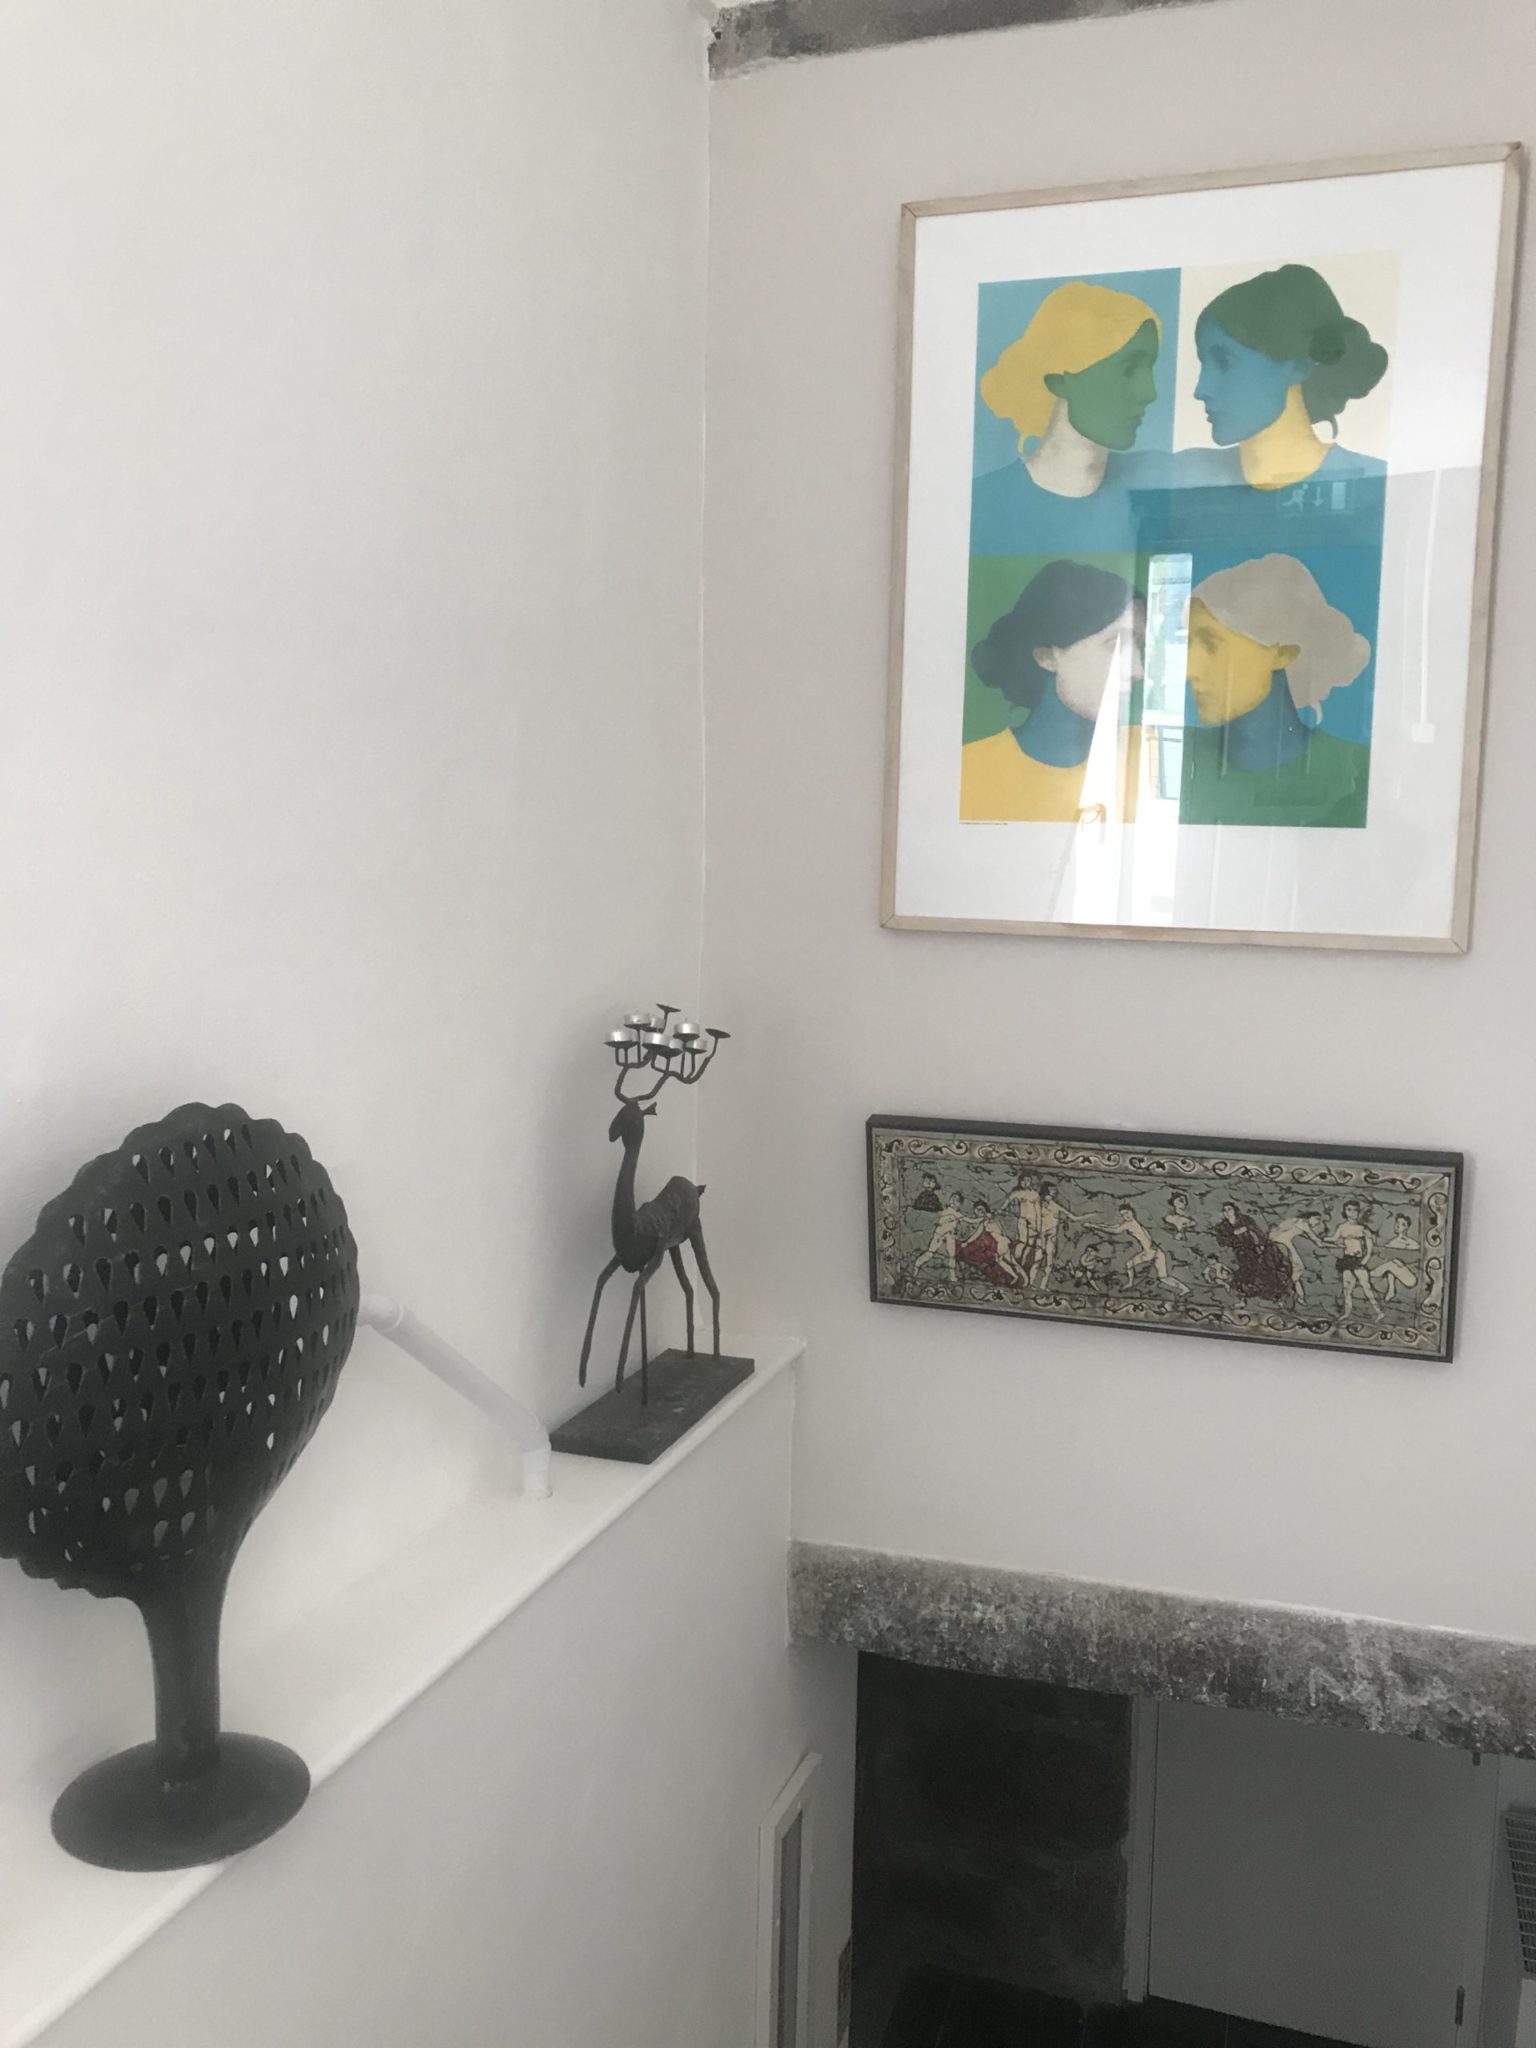 photo of my painting 'at the intersection of powers' hanging underneath another art work viginia woolf print in a private home